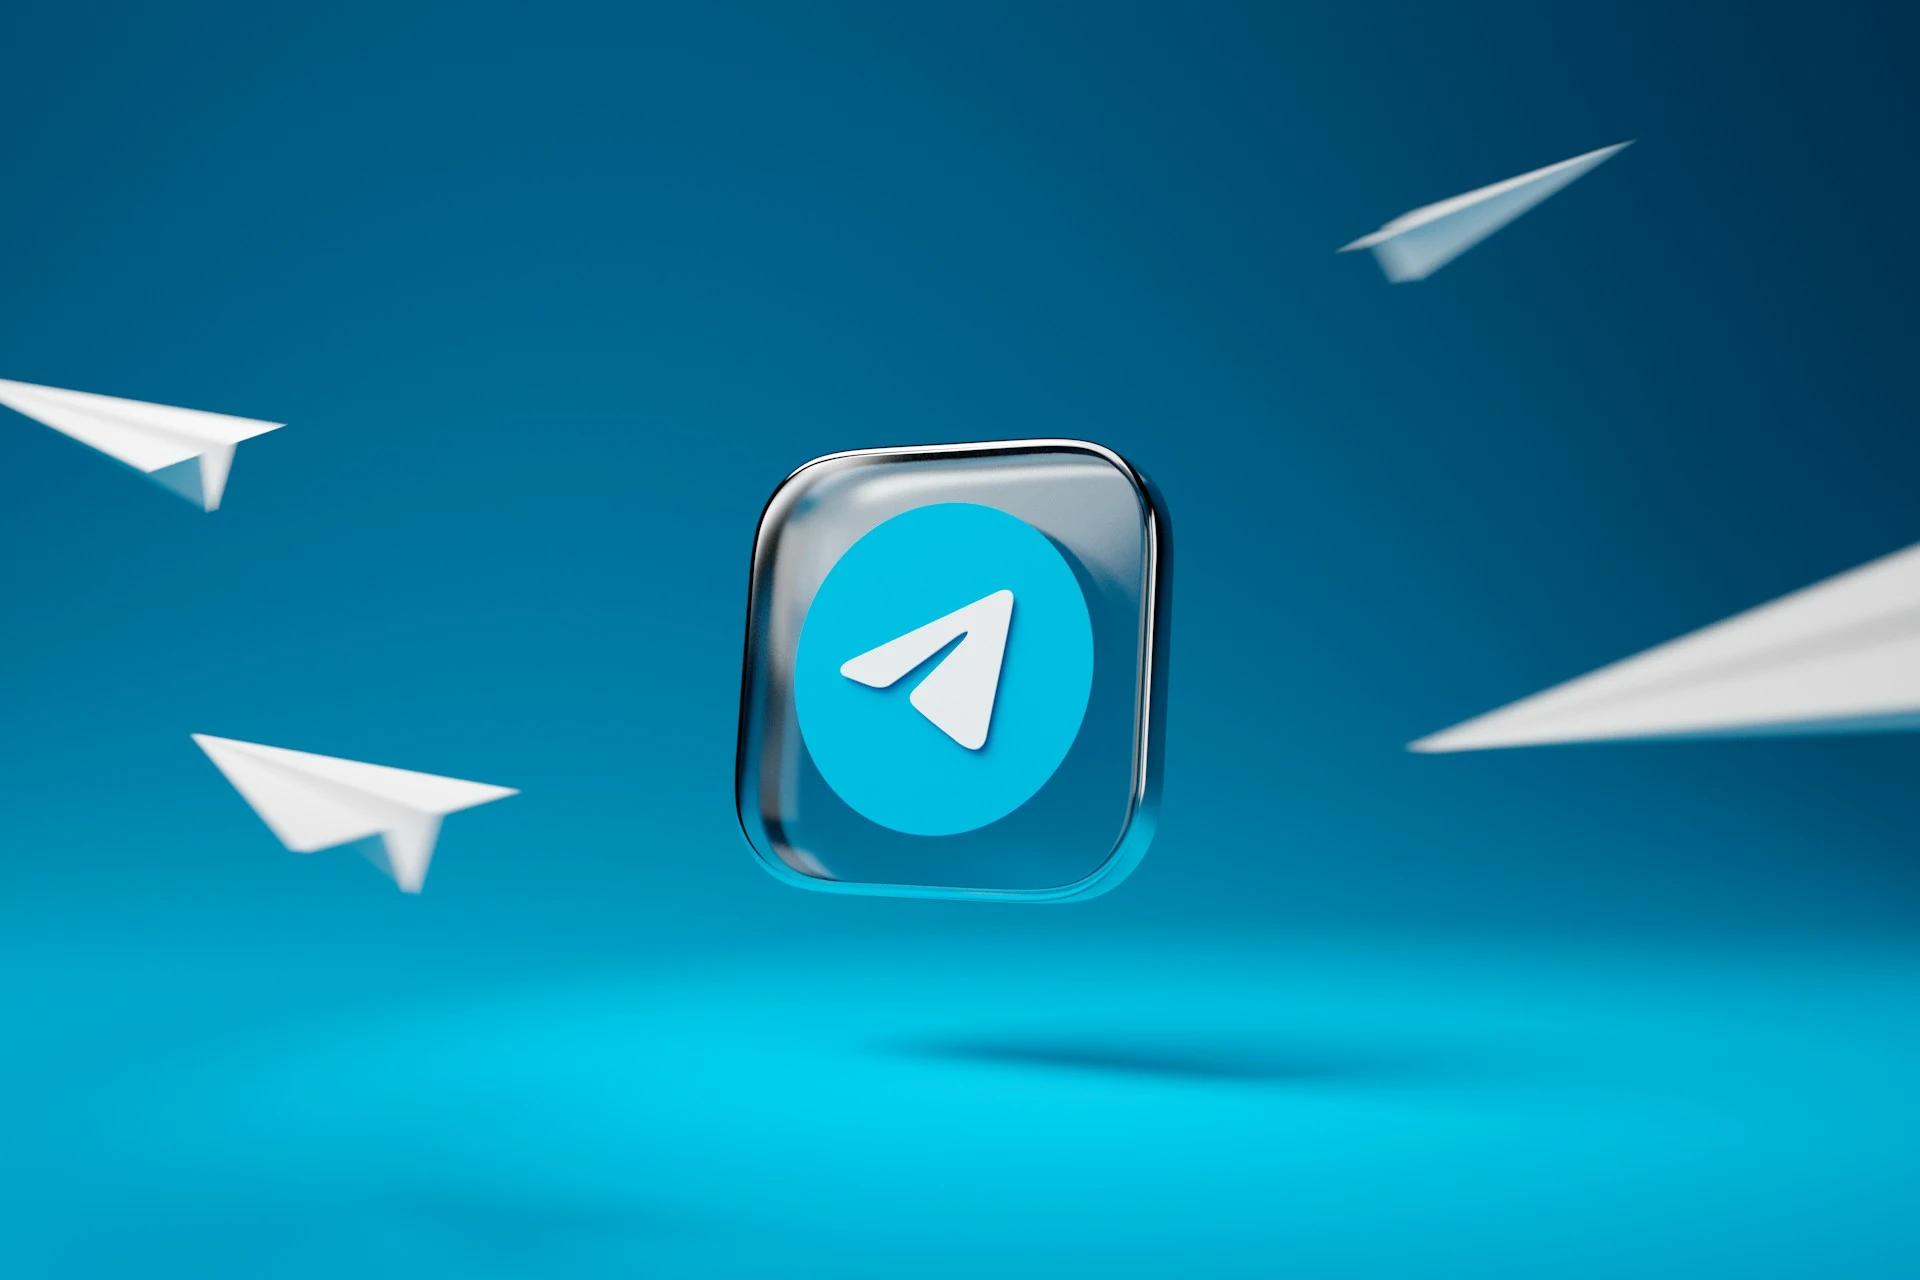 How to receive alerts in Telegram when a website changes